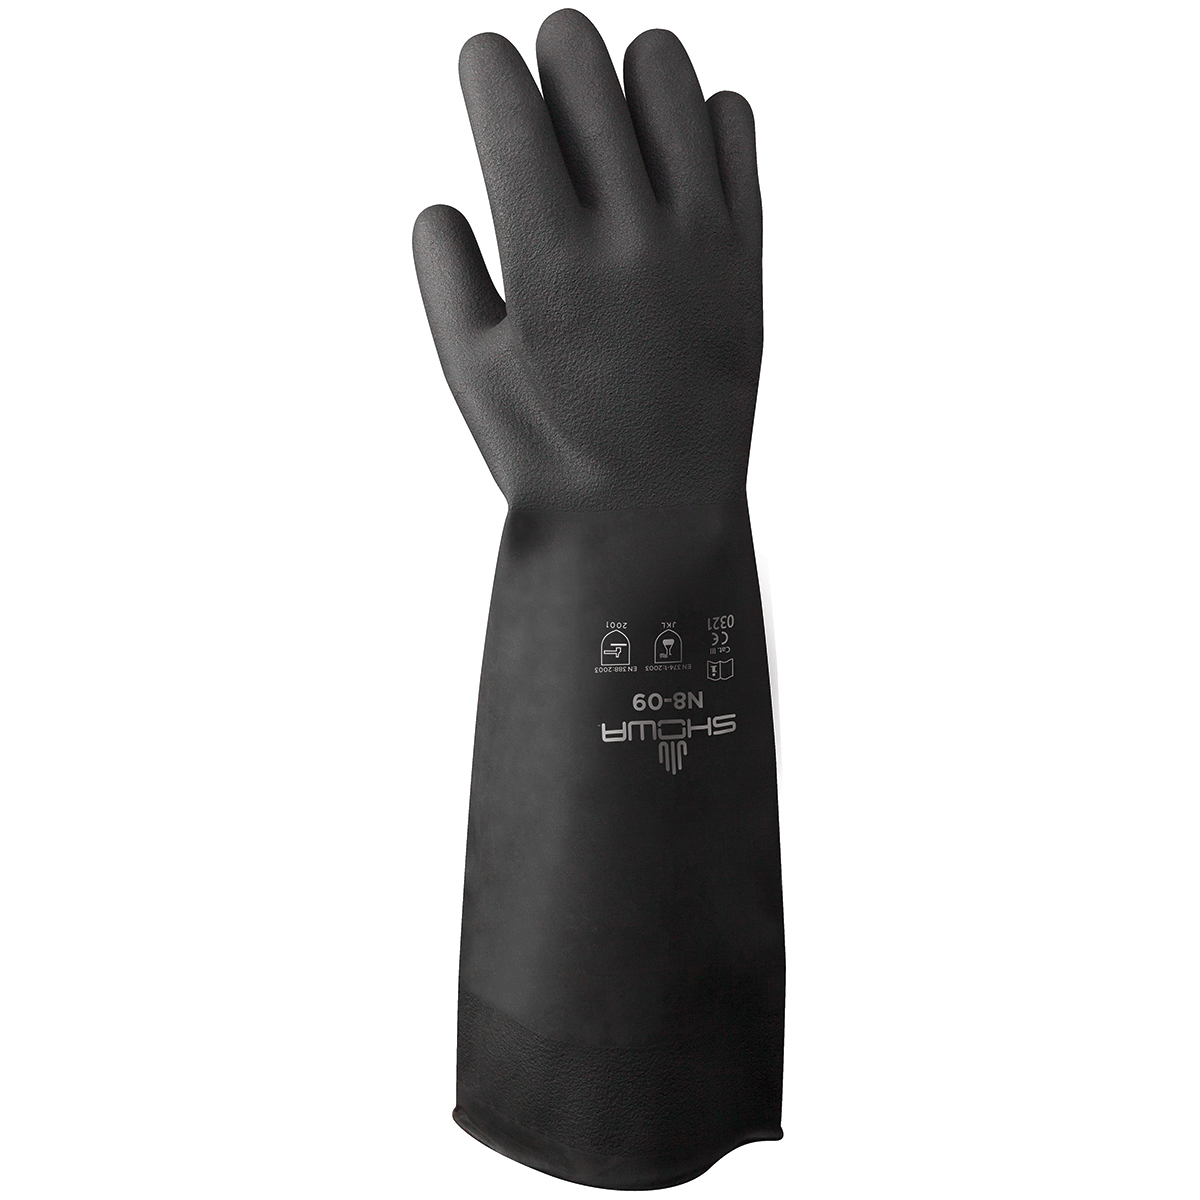 Chemical resistant unsupported neoprene, 18